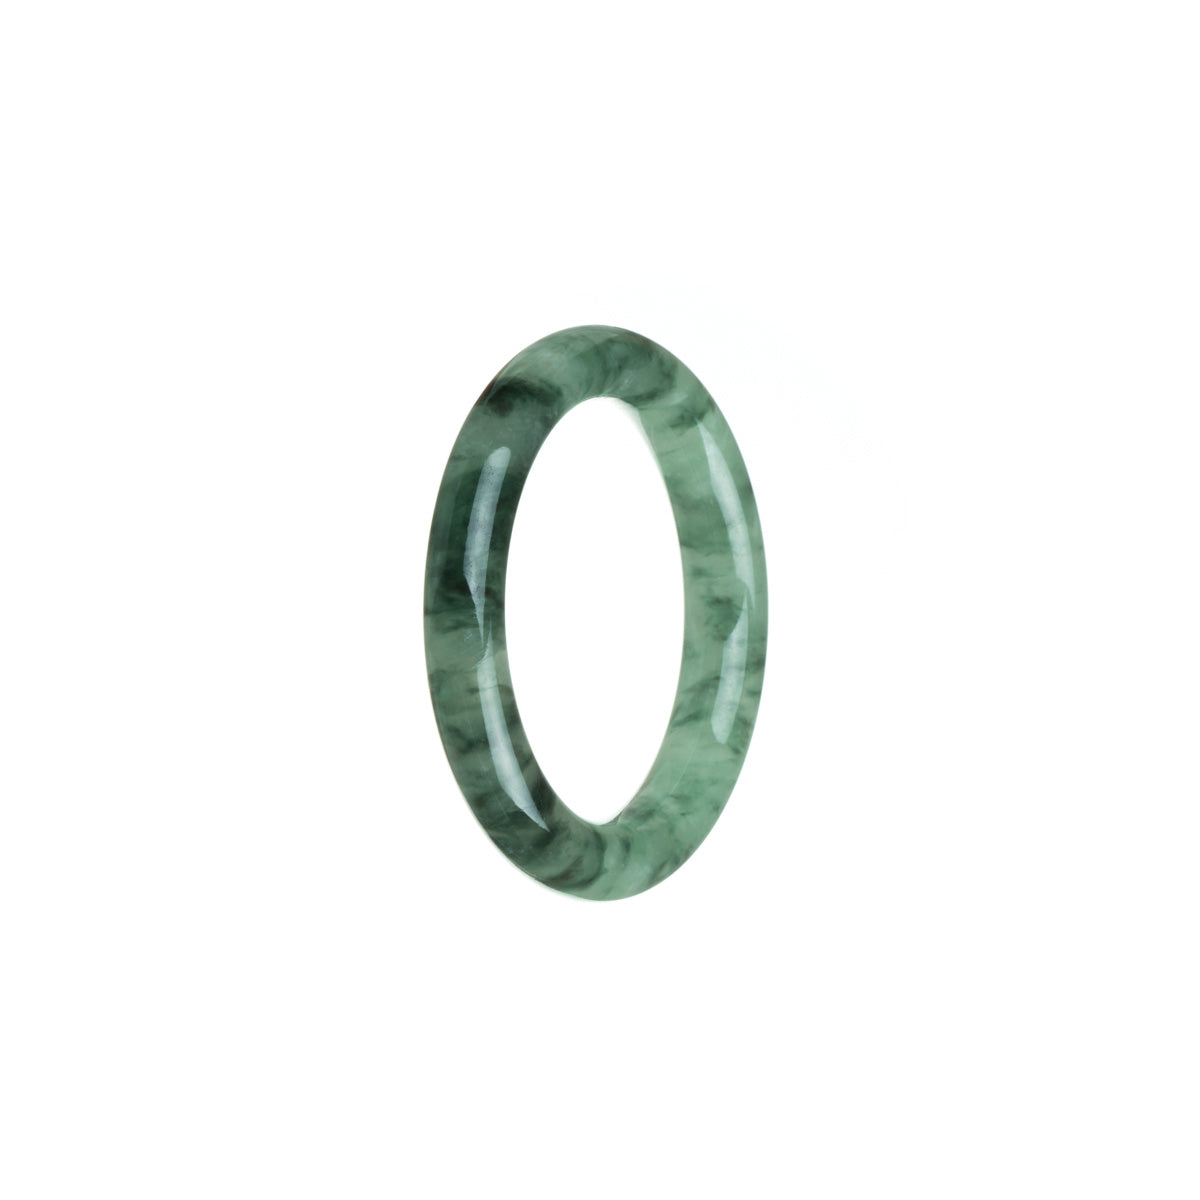 An elegant and delicate green jadeite bangle bracelet designed specifically for children. Crafted from genuine Grade A jadeite, this bracelet from MAYS is a timeless piece of jewelry that adds a touch of sophistication to any outfit.